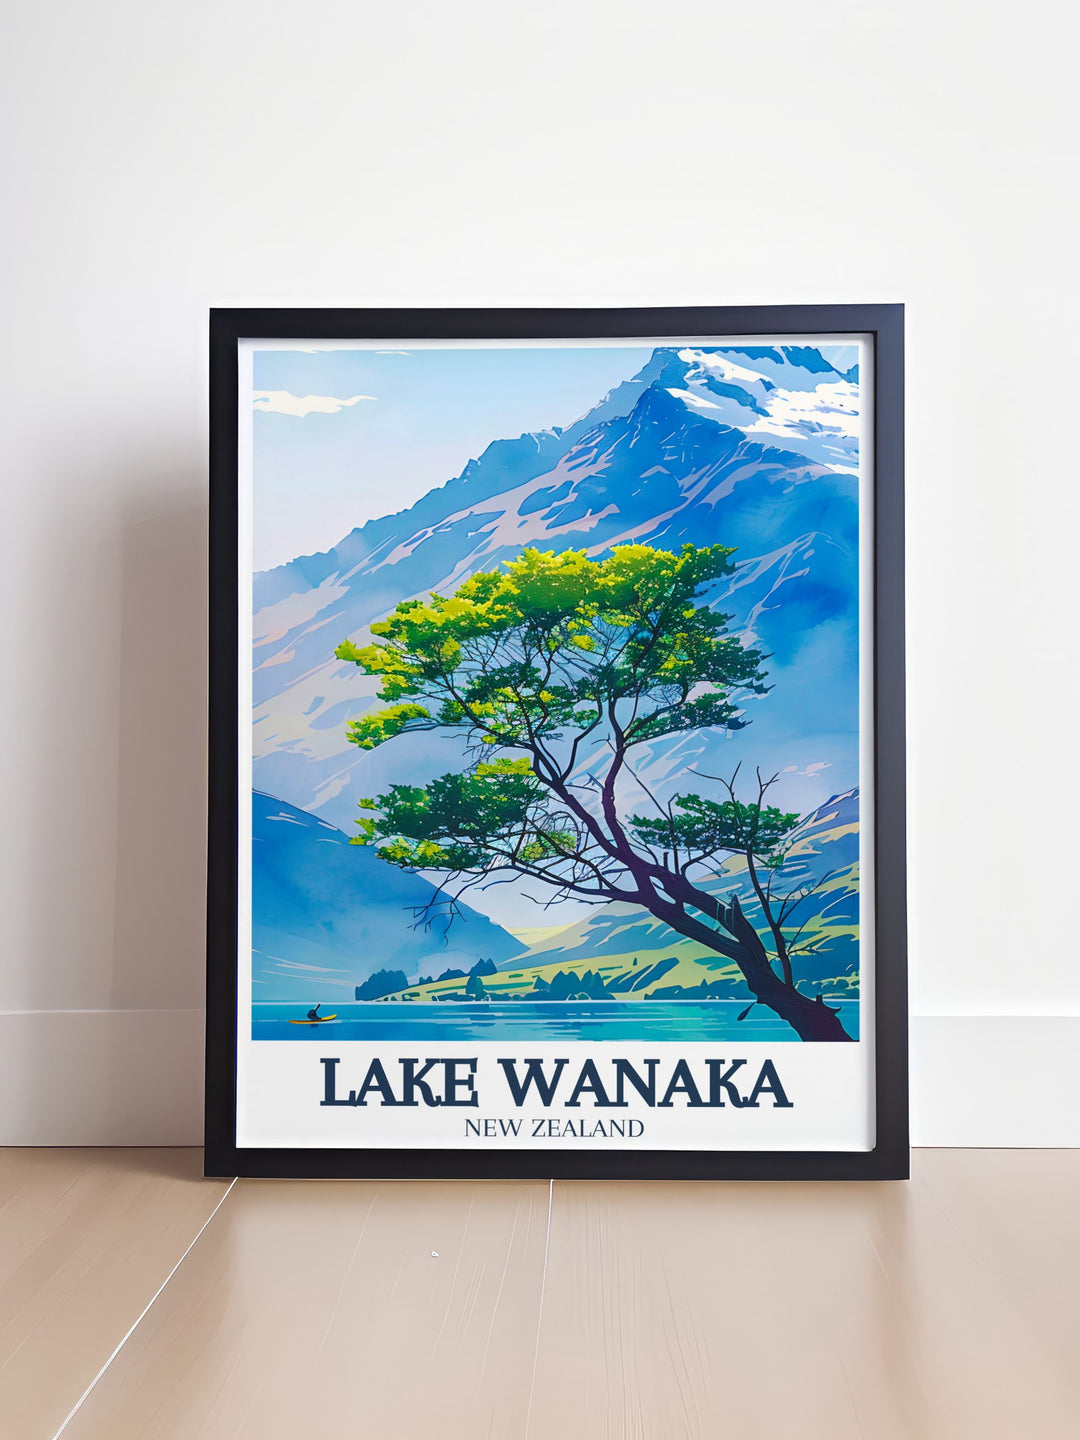 Captivating Lake Wanaka art print with the iconic lake wanaka tree in Mount Aspiring National Park Ideal for nature lovers and travel enthusiasts looking to enhance their home decor with a piece of New Zealand